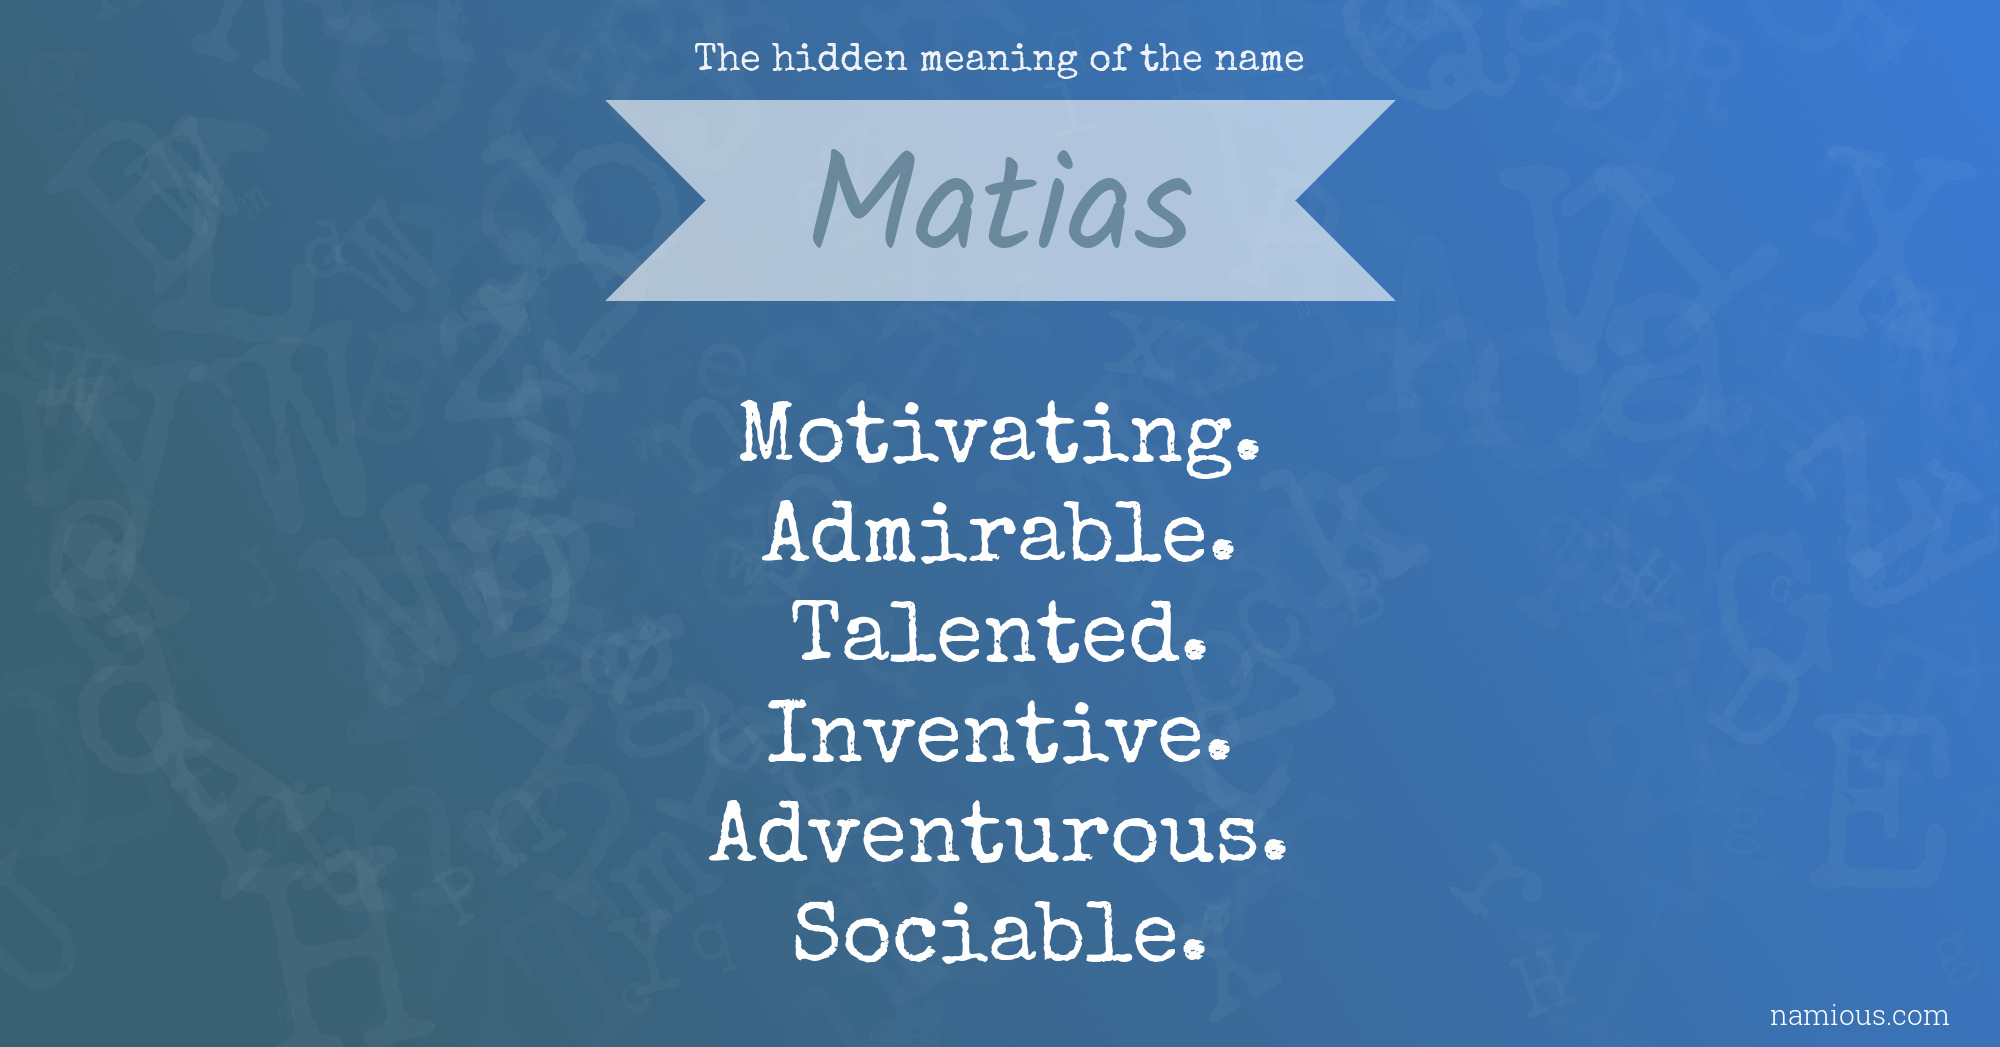 The hidden meaning of the name Matias